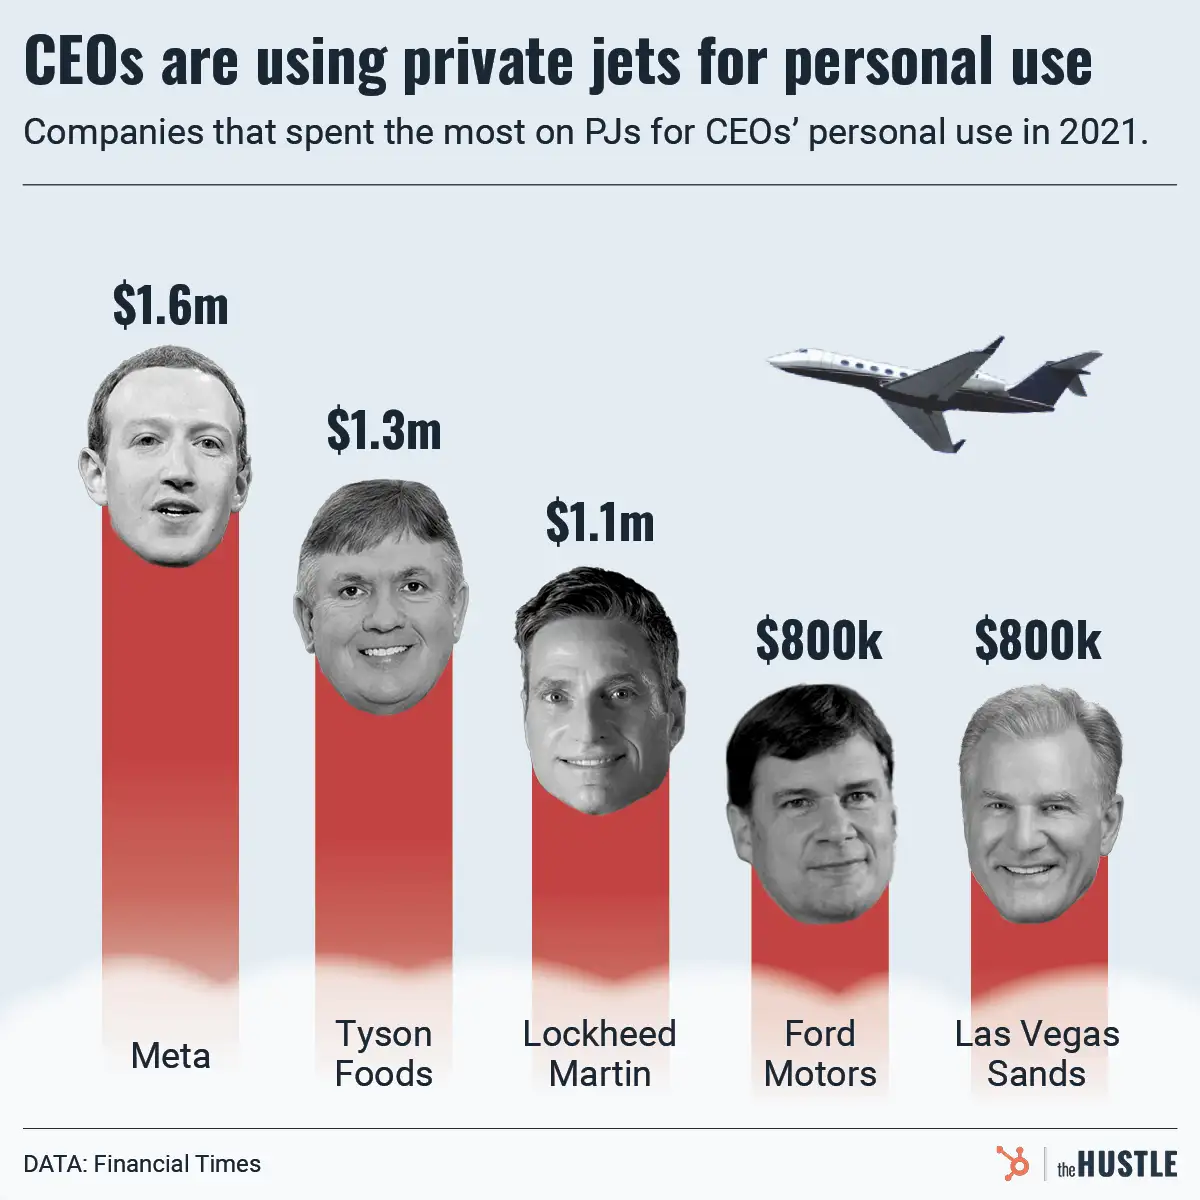 Companies are spending big on private jets